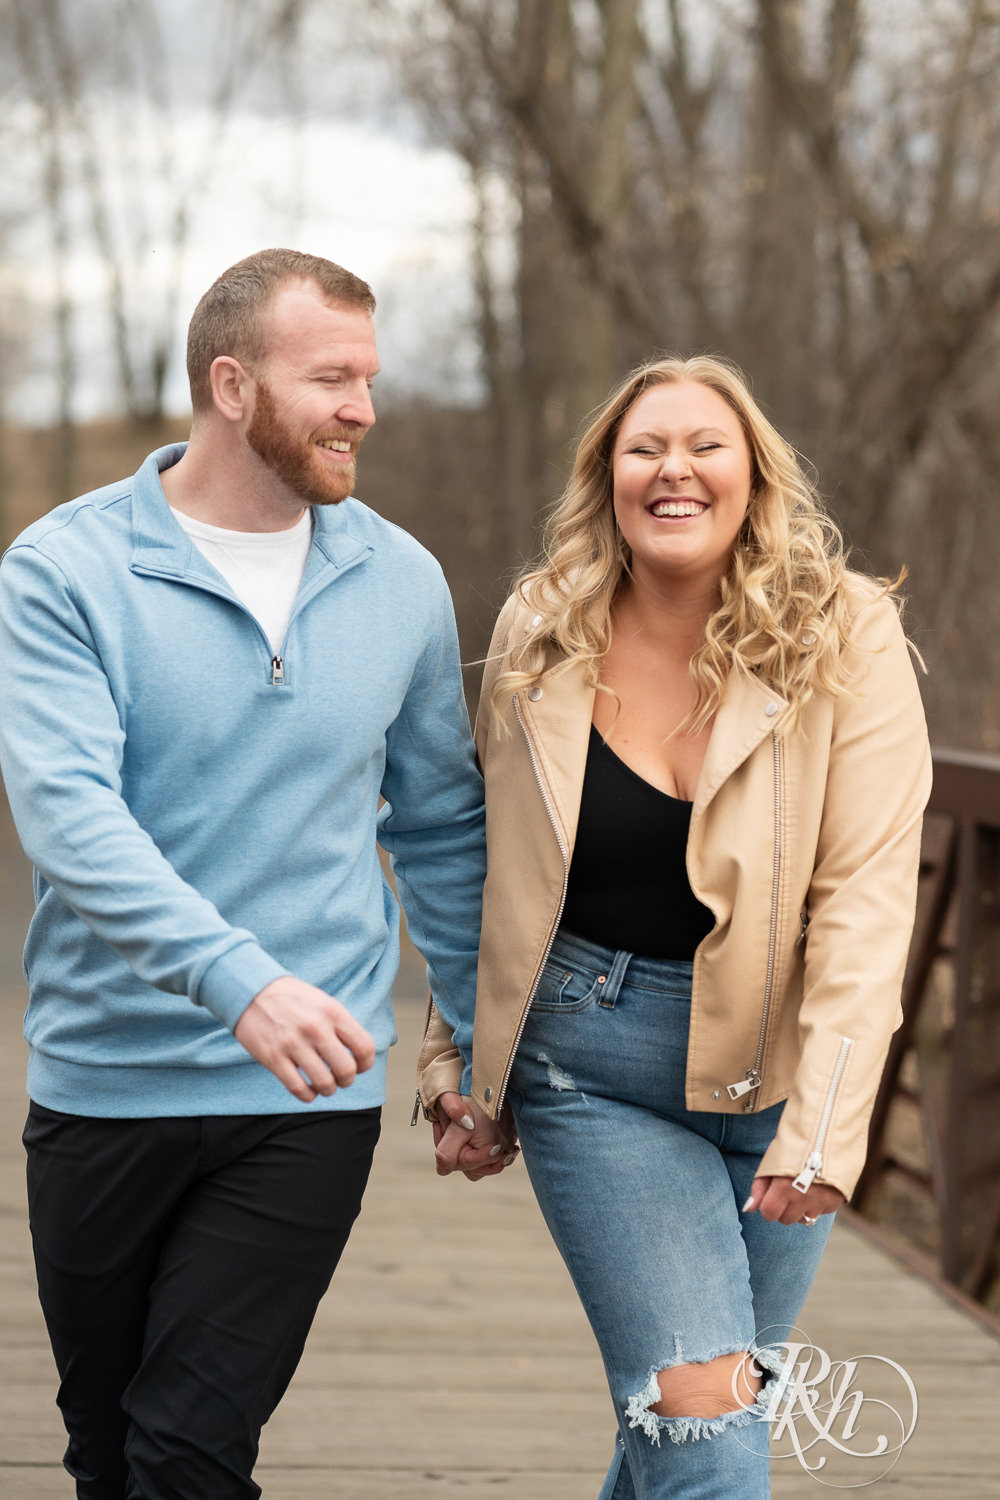 Man in blue shirt and woman in jeans laugh on bridge during engagement photography at Rice Creek Regional Trail in Shoreview, Minnesota.